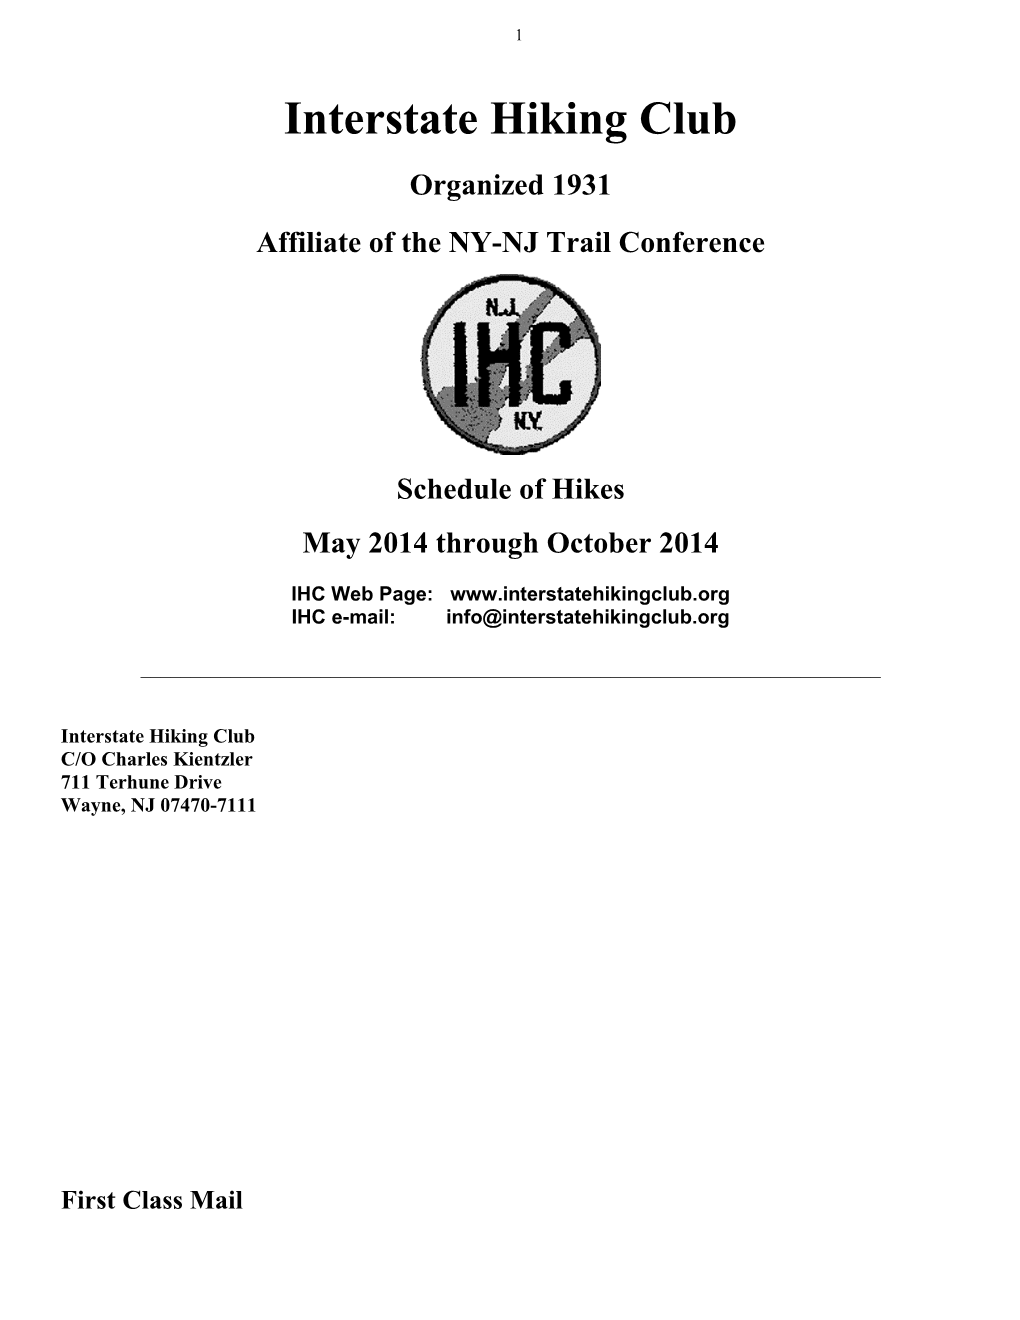 IHC Schedule for May 2014